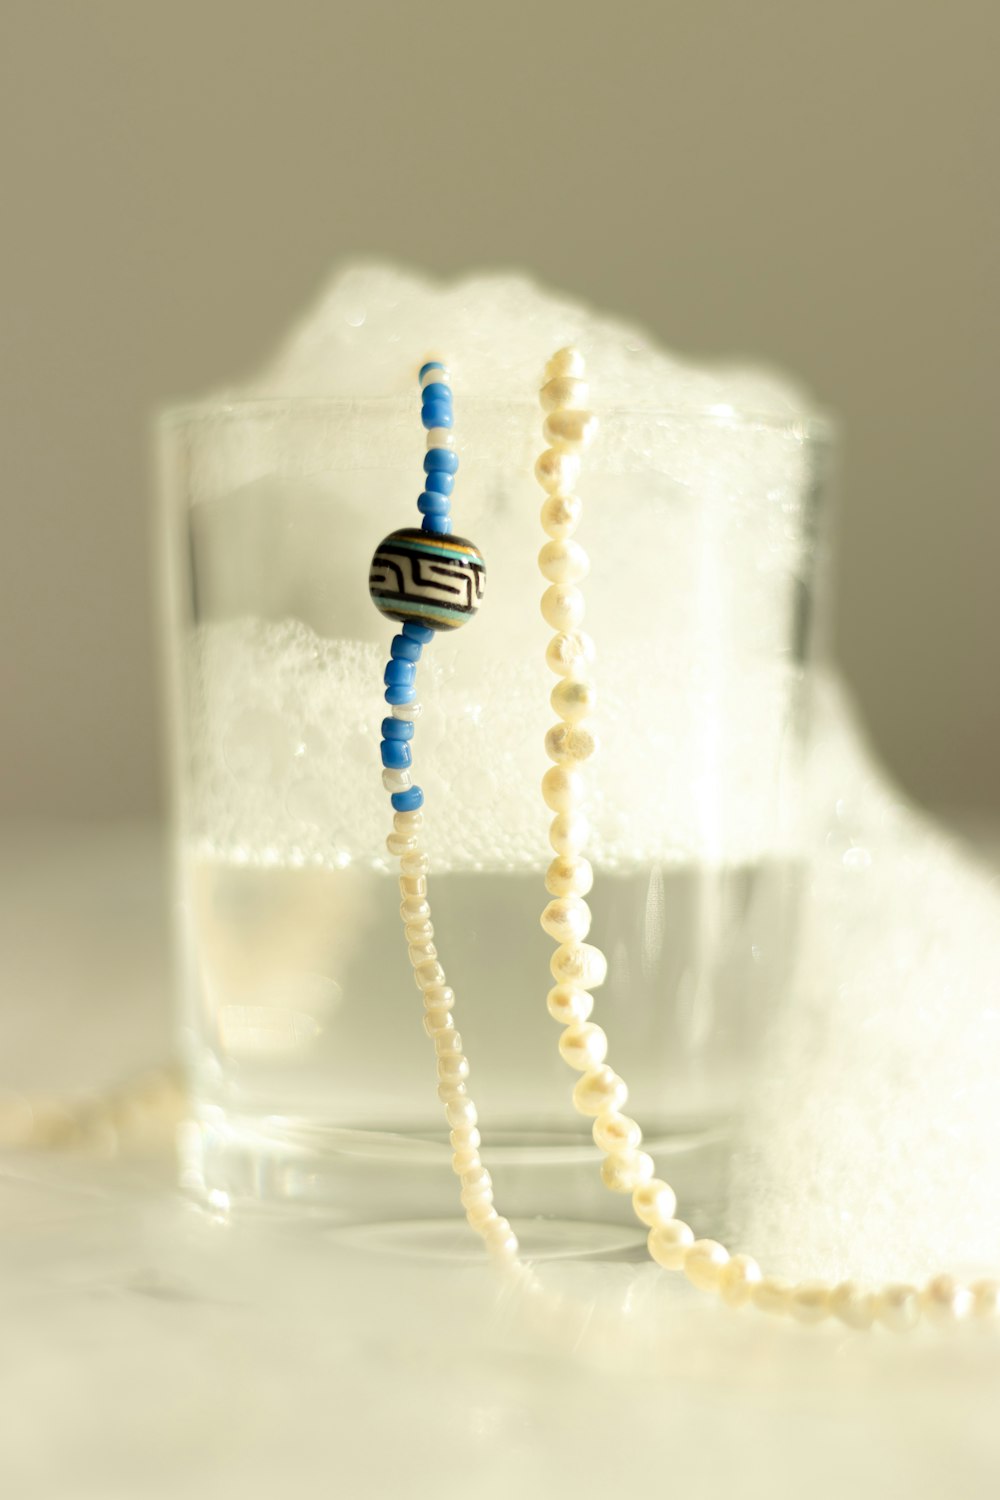 a beaded necklace sitting on top of a glass of water